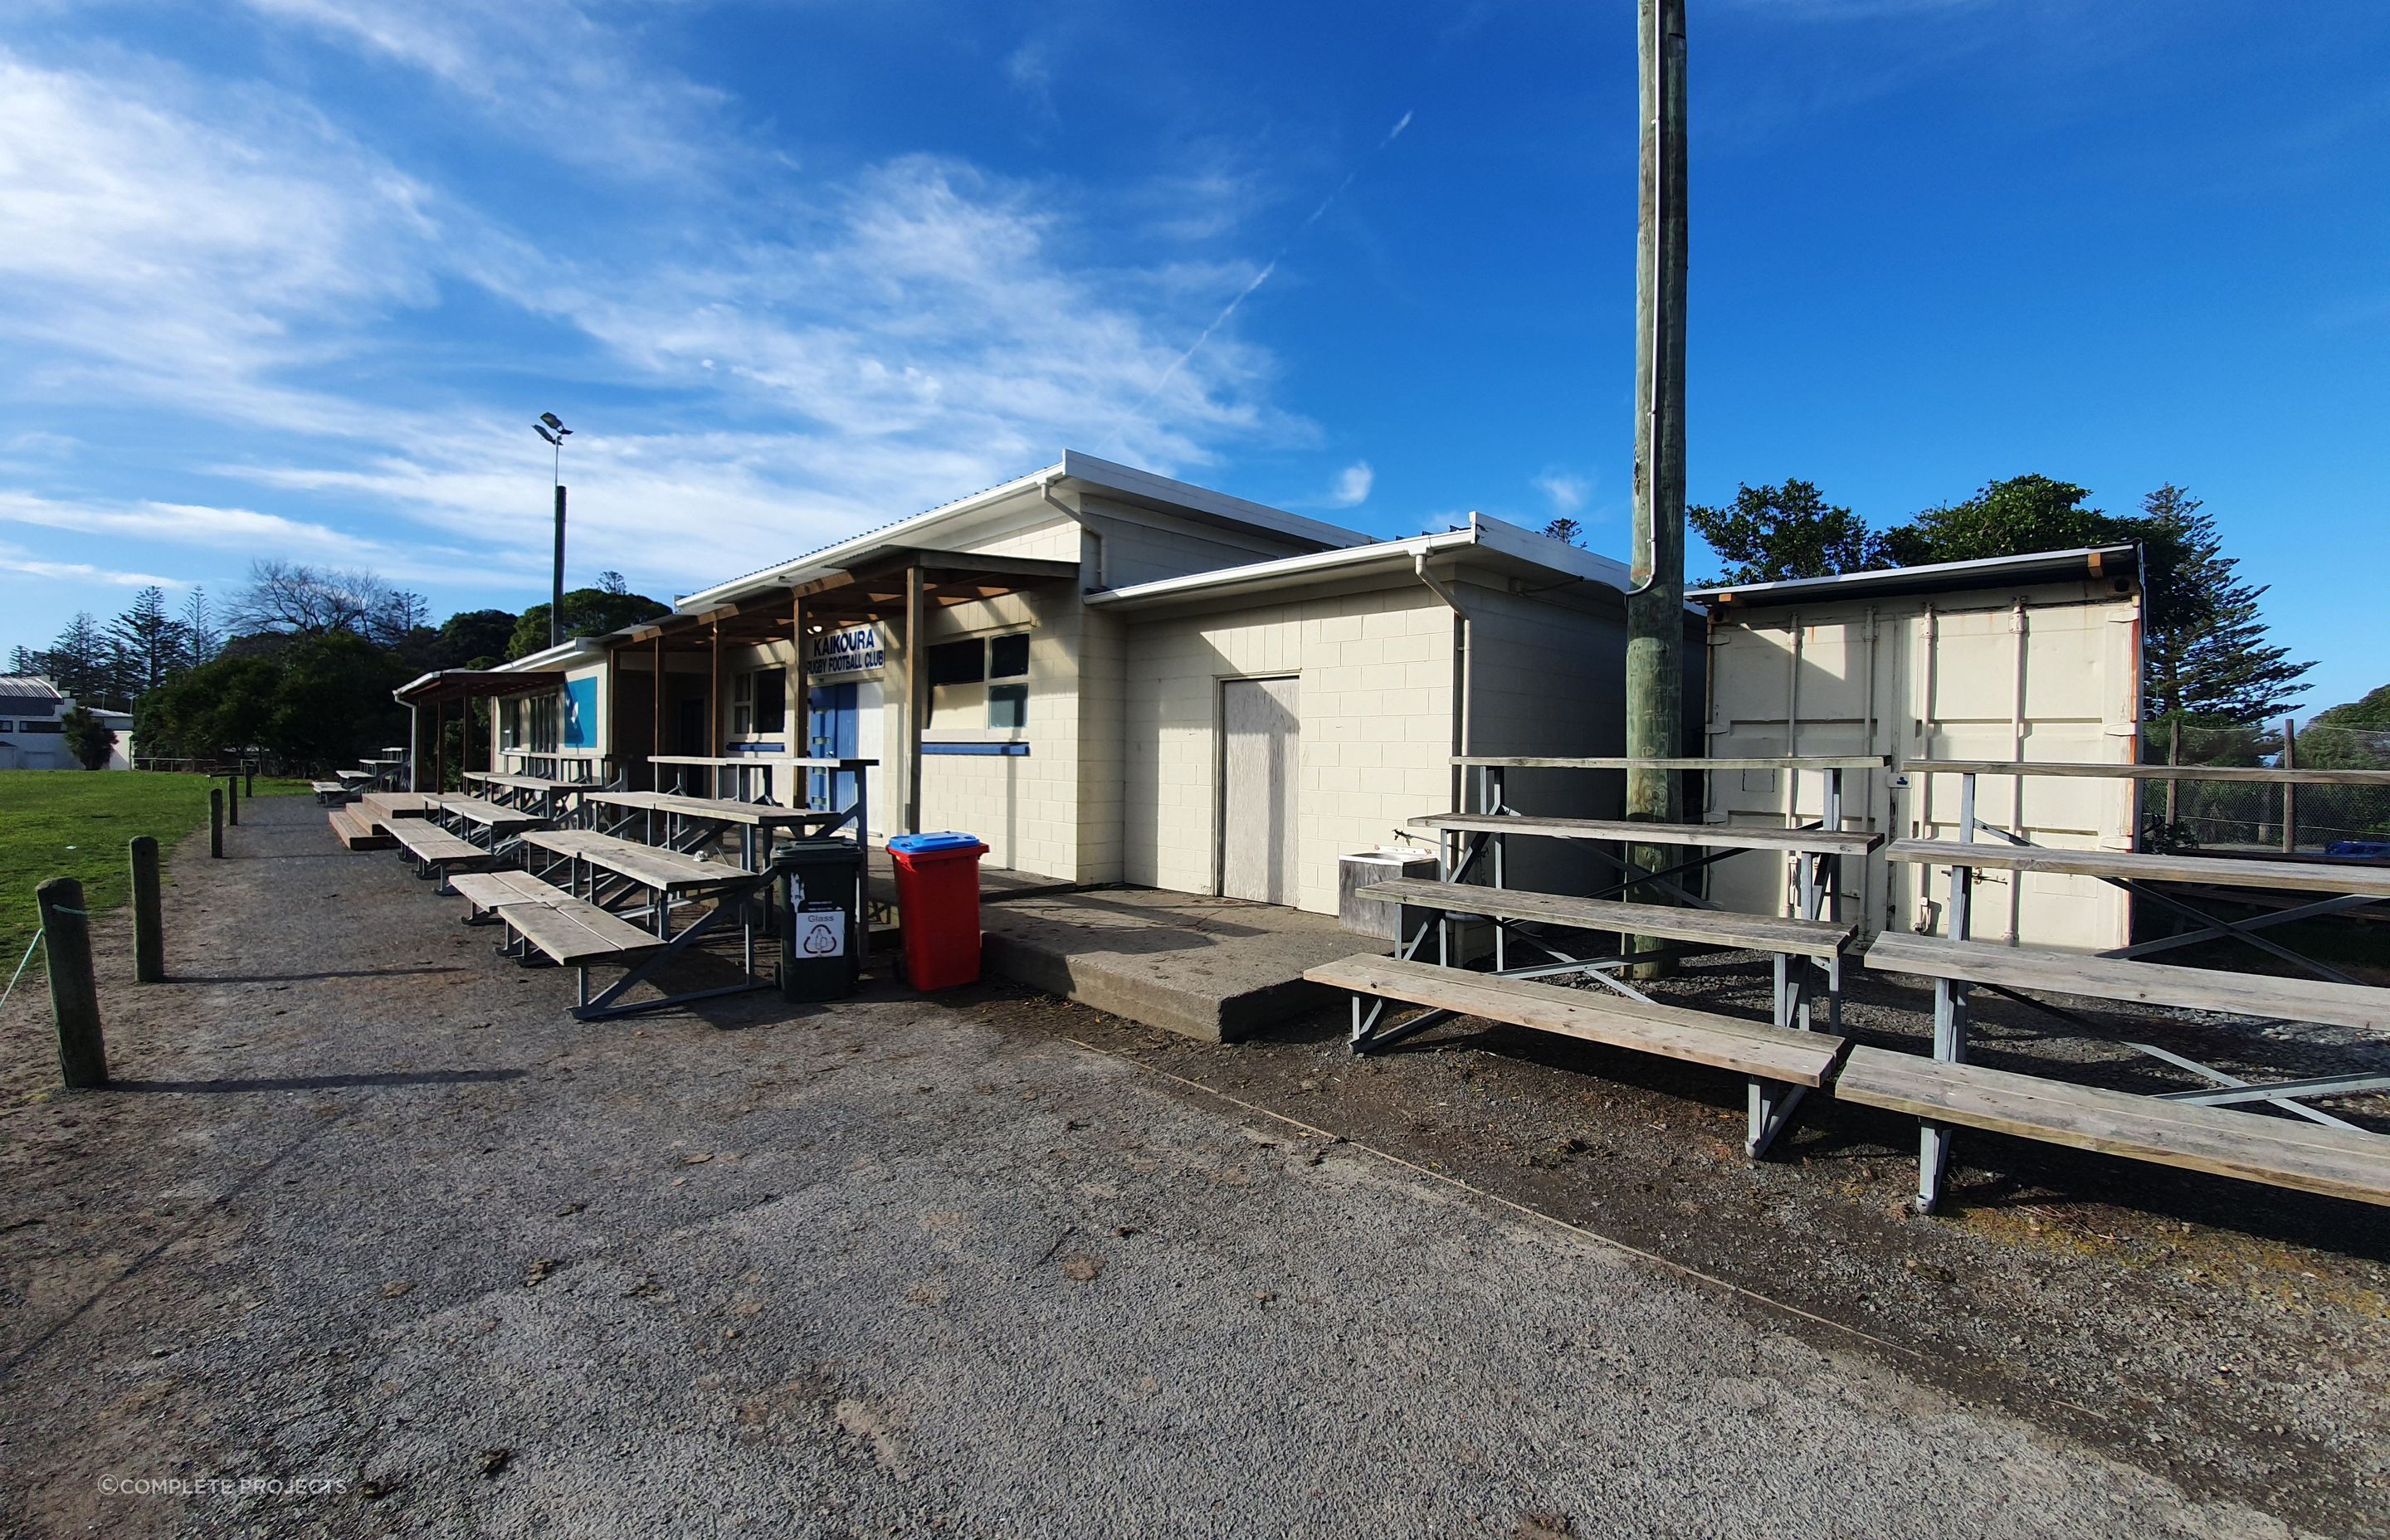 The old clubrooms which were damaged in the 2016 Kaikōura earthquake